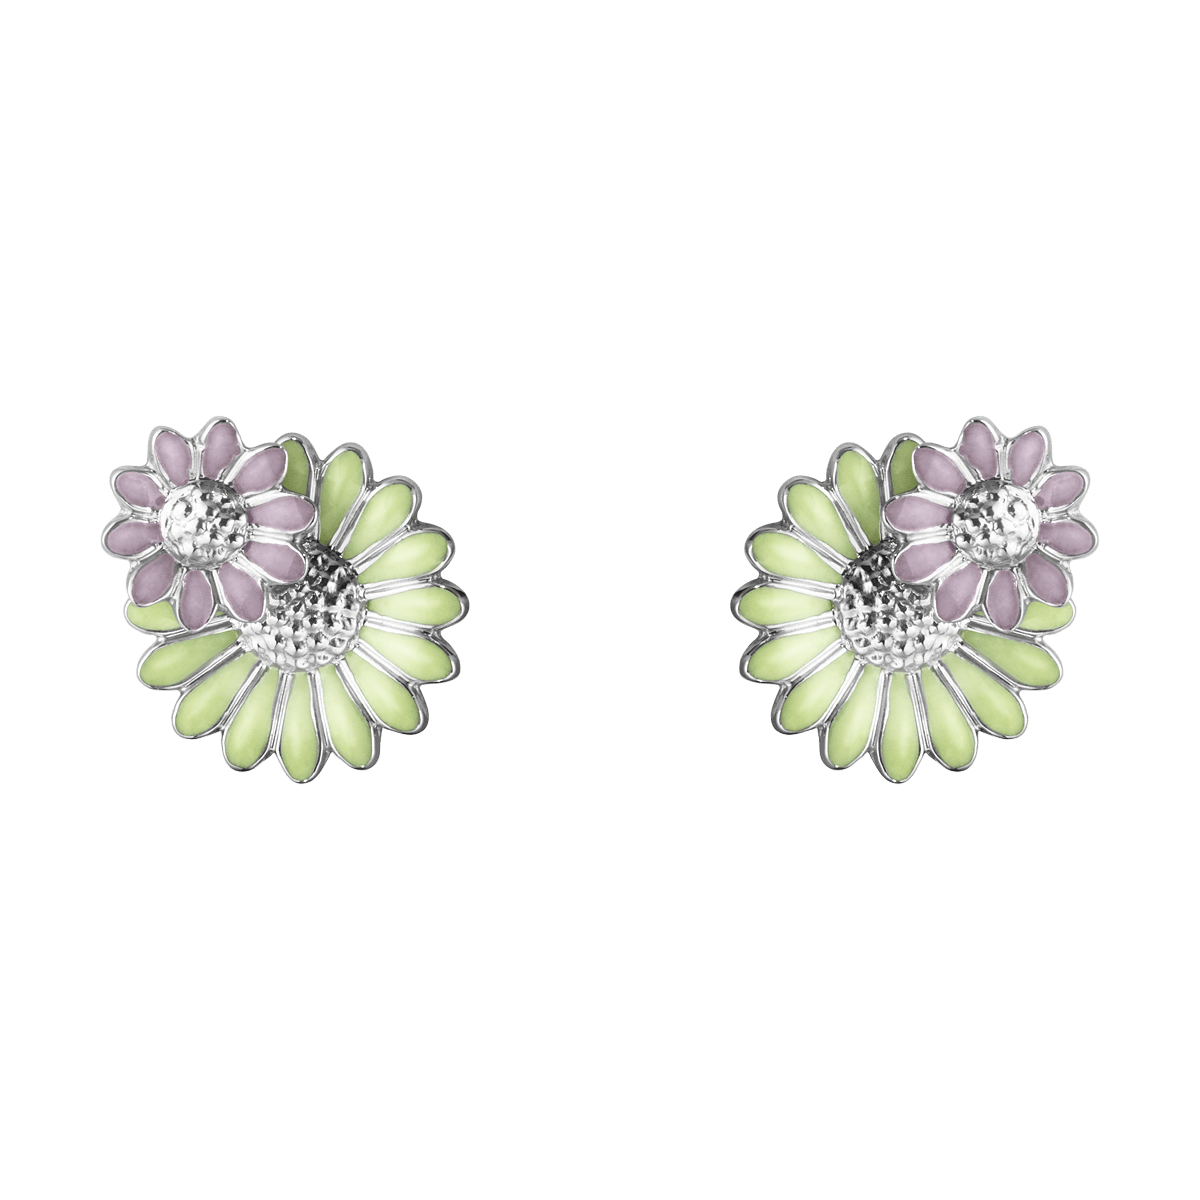 georg jensen daisy layered stud earrings in silver with pink and green enamel 20001126